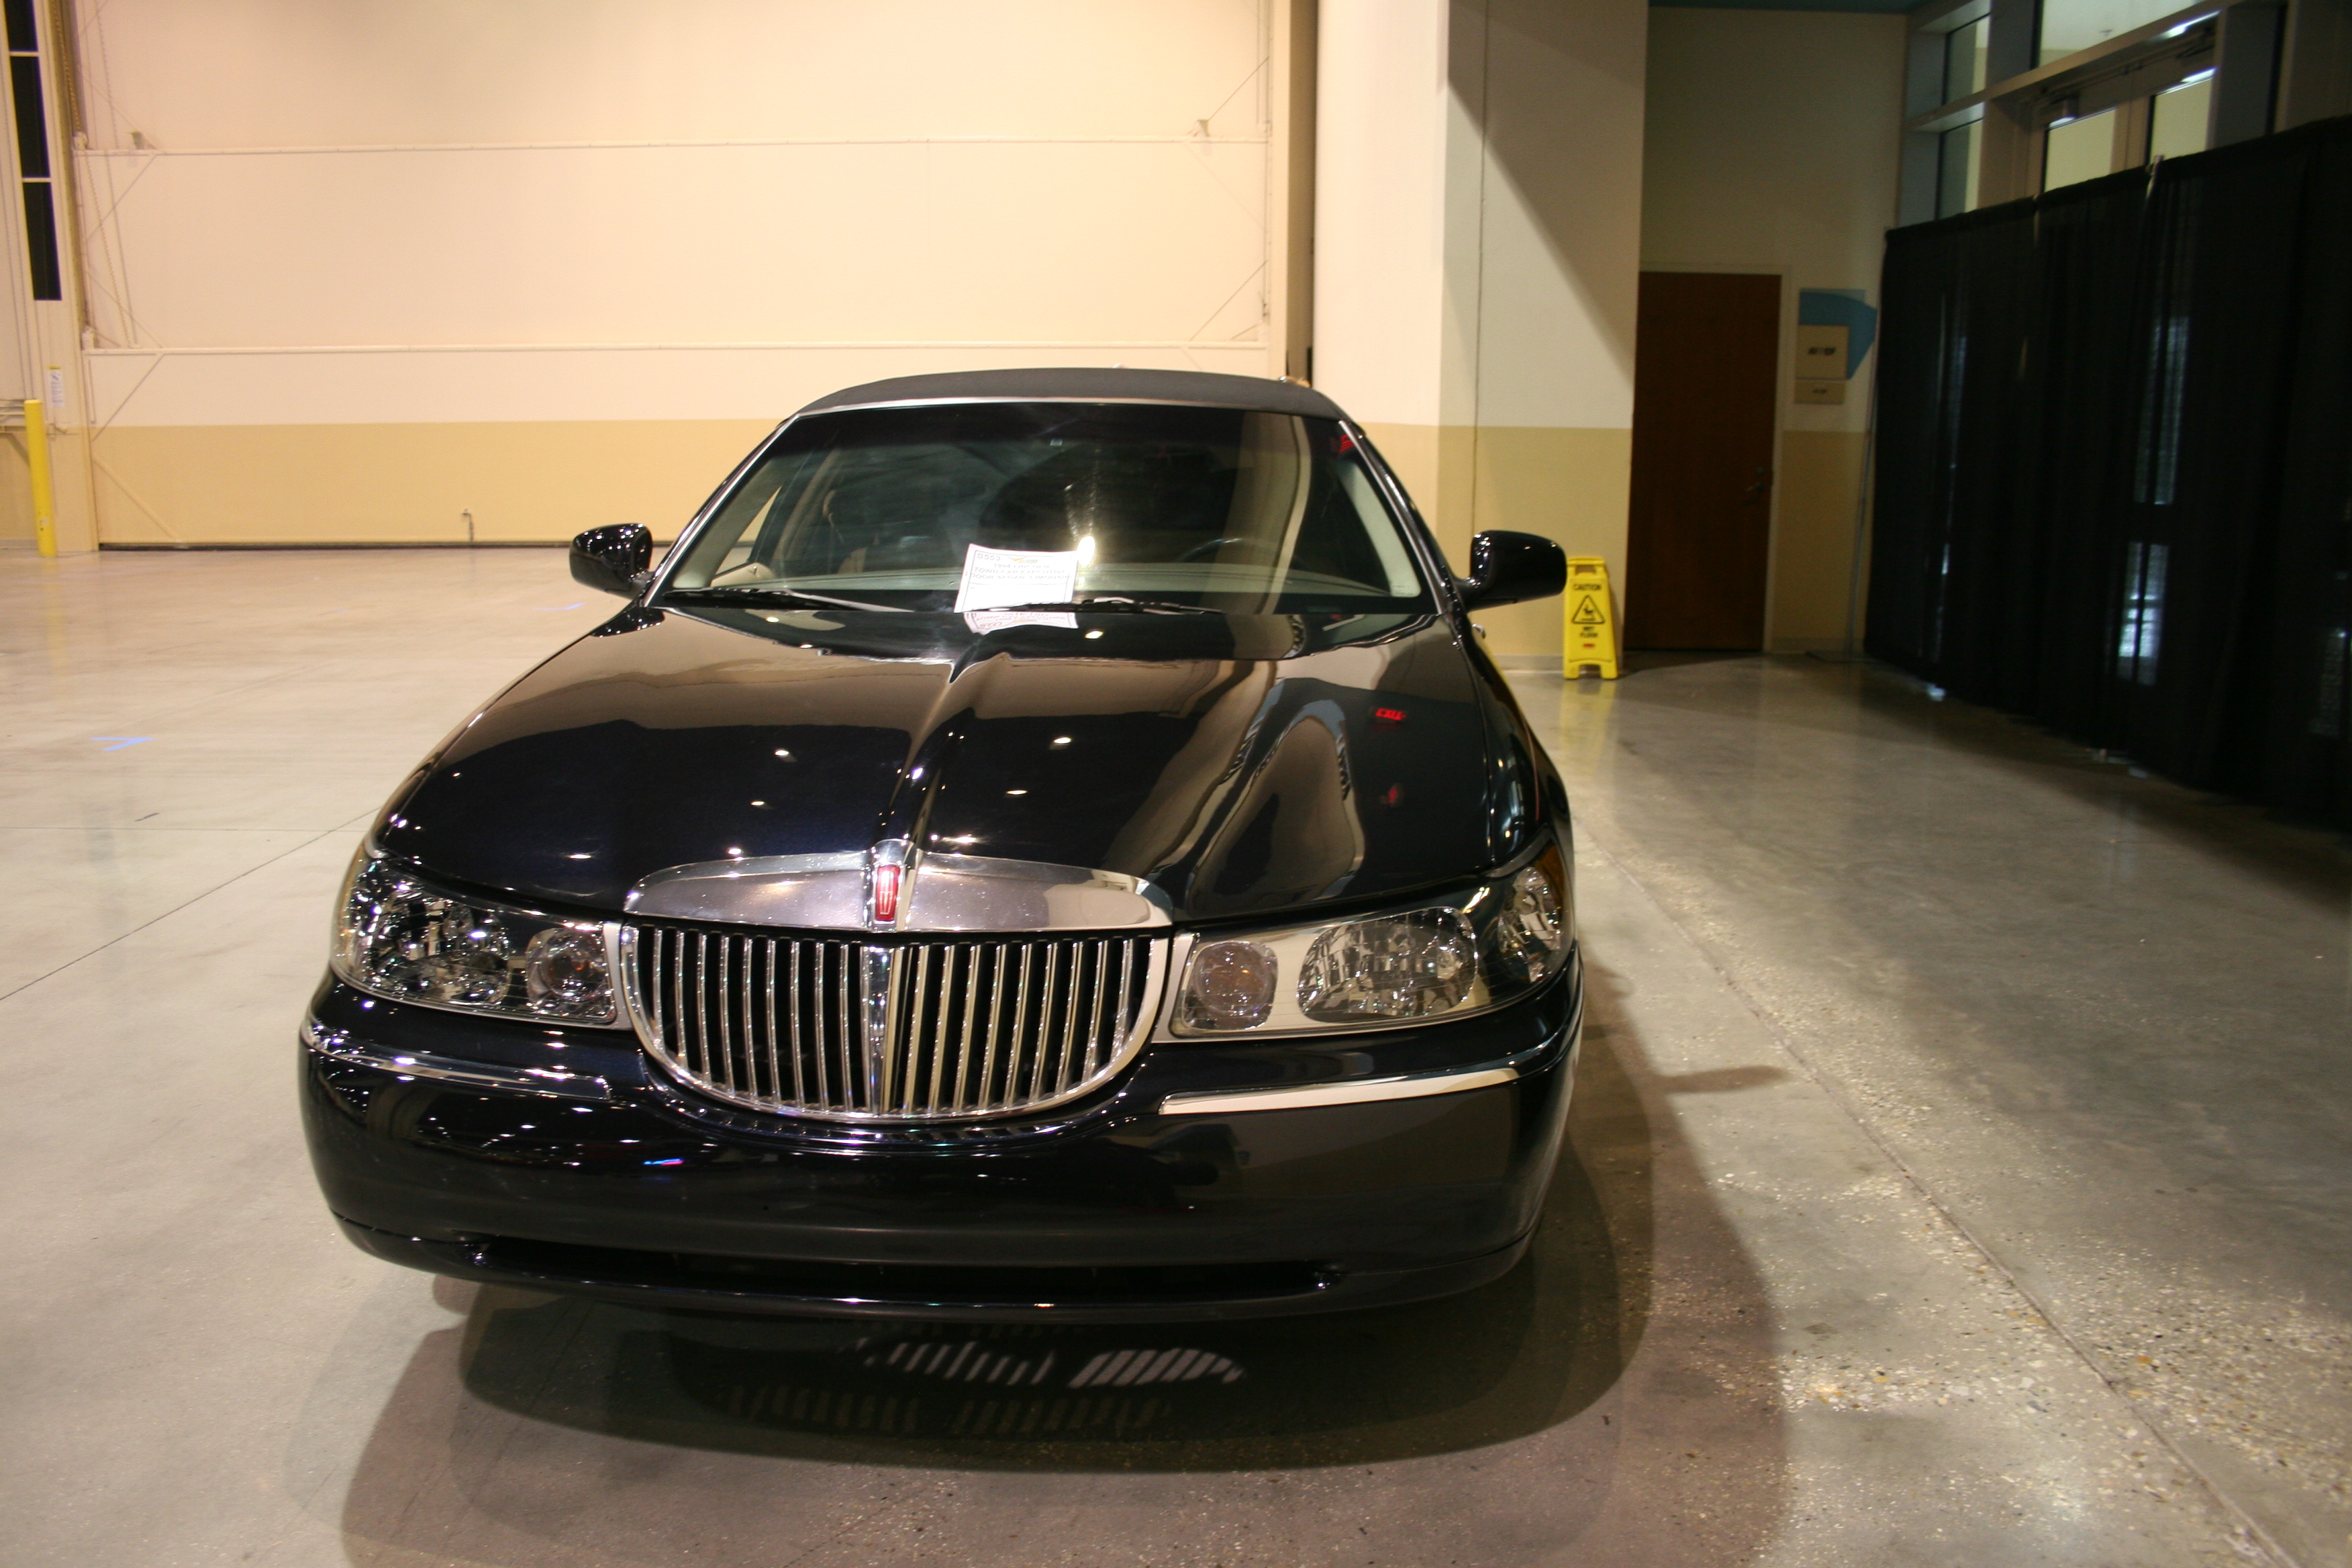 0th Image of a 1998 LINCOLN TOWN CAR EXECUTIVE